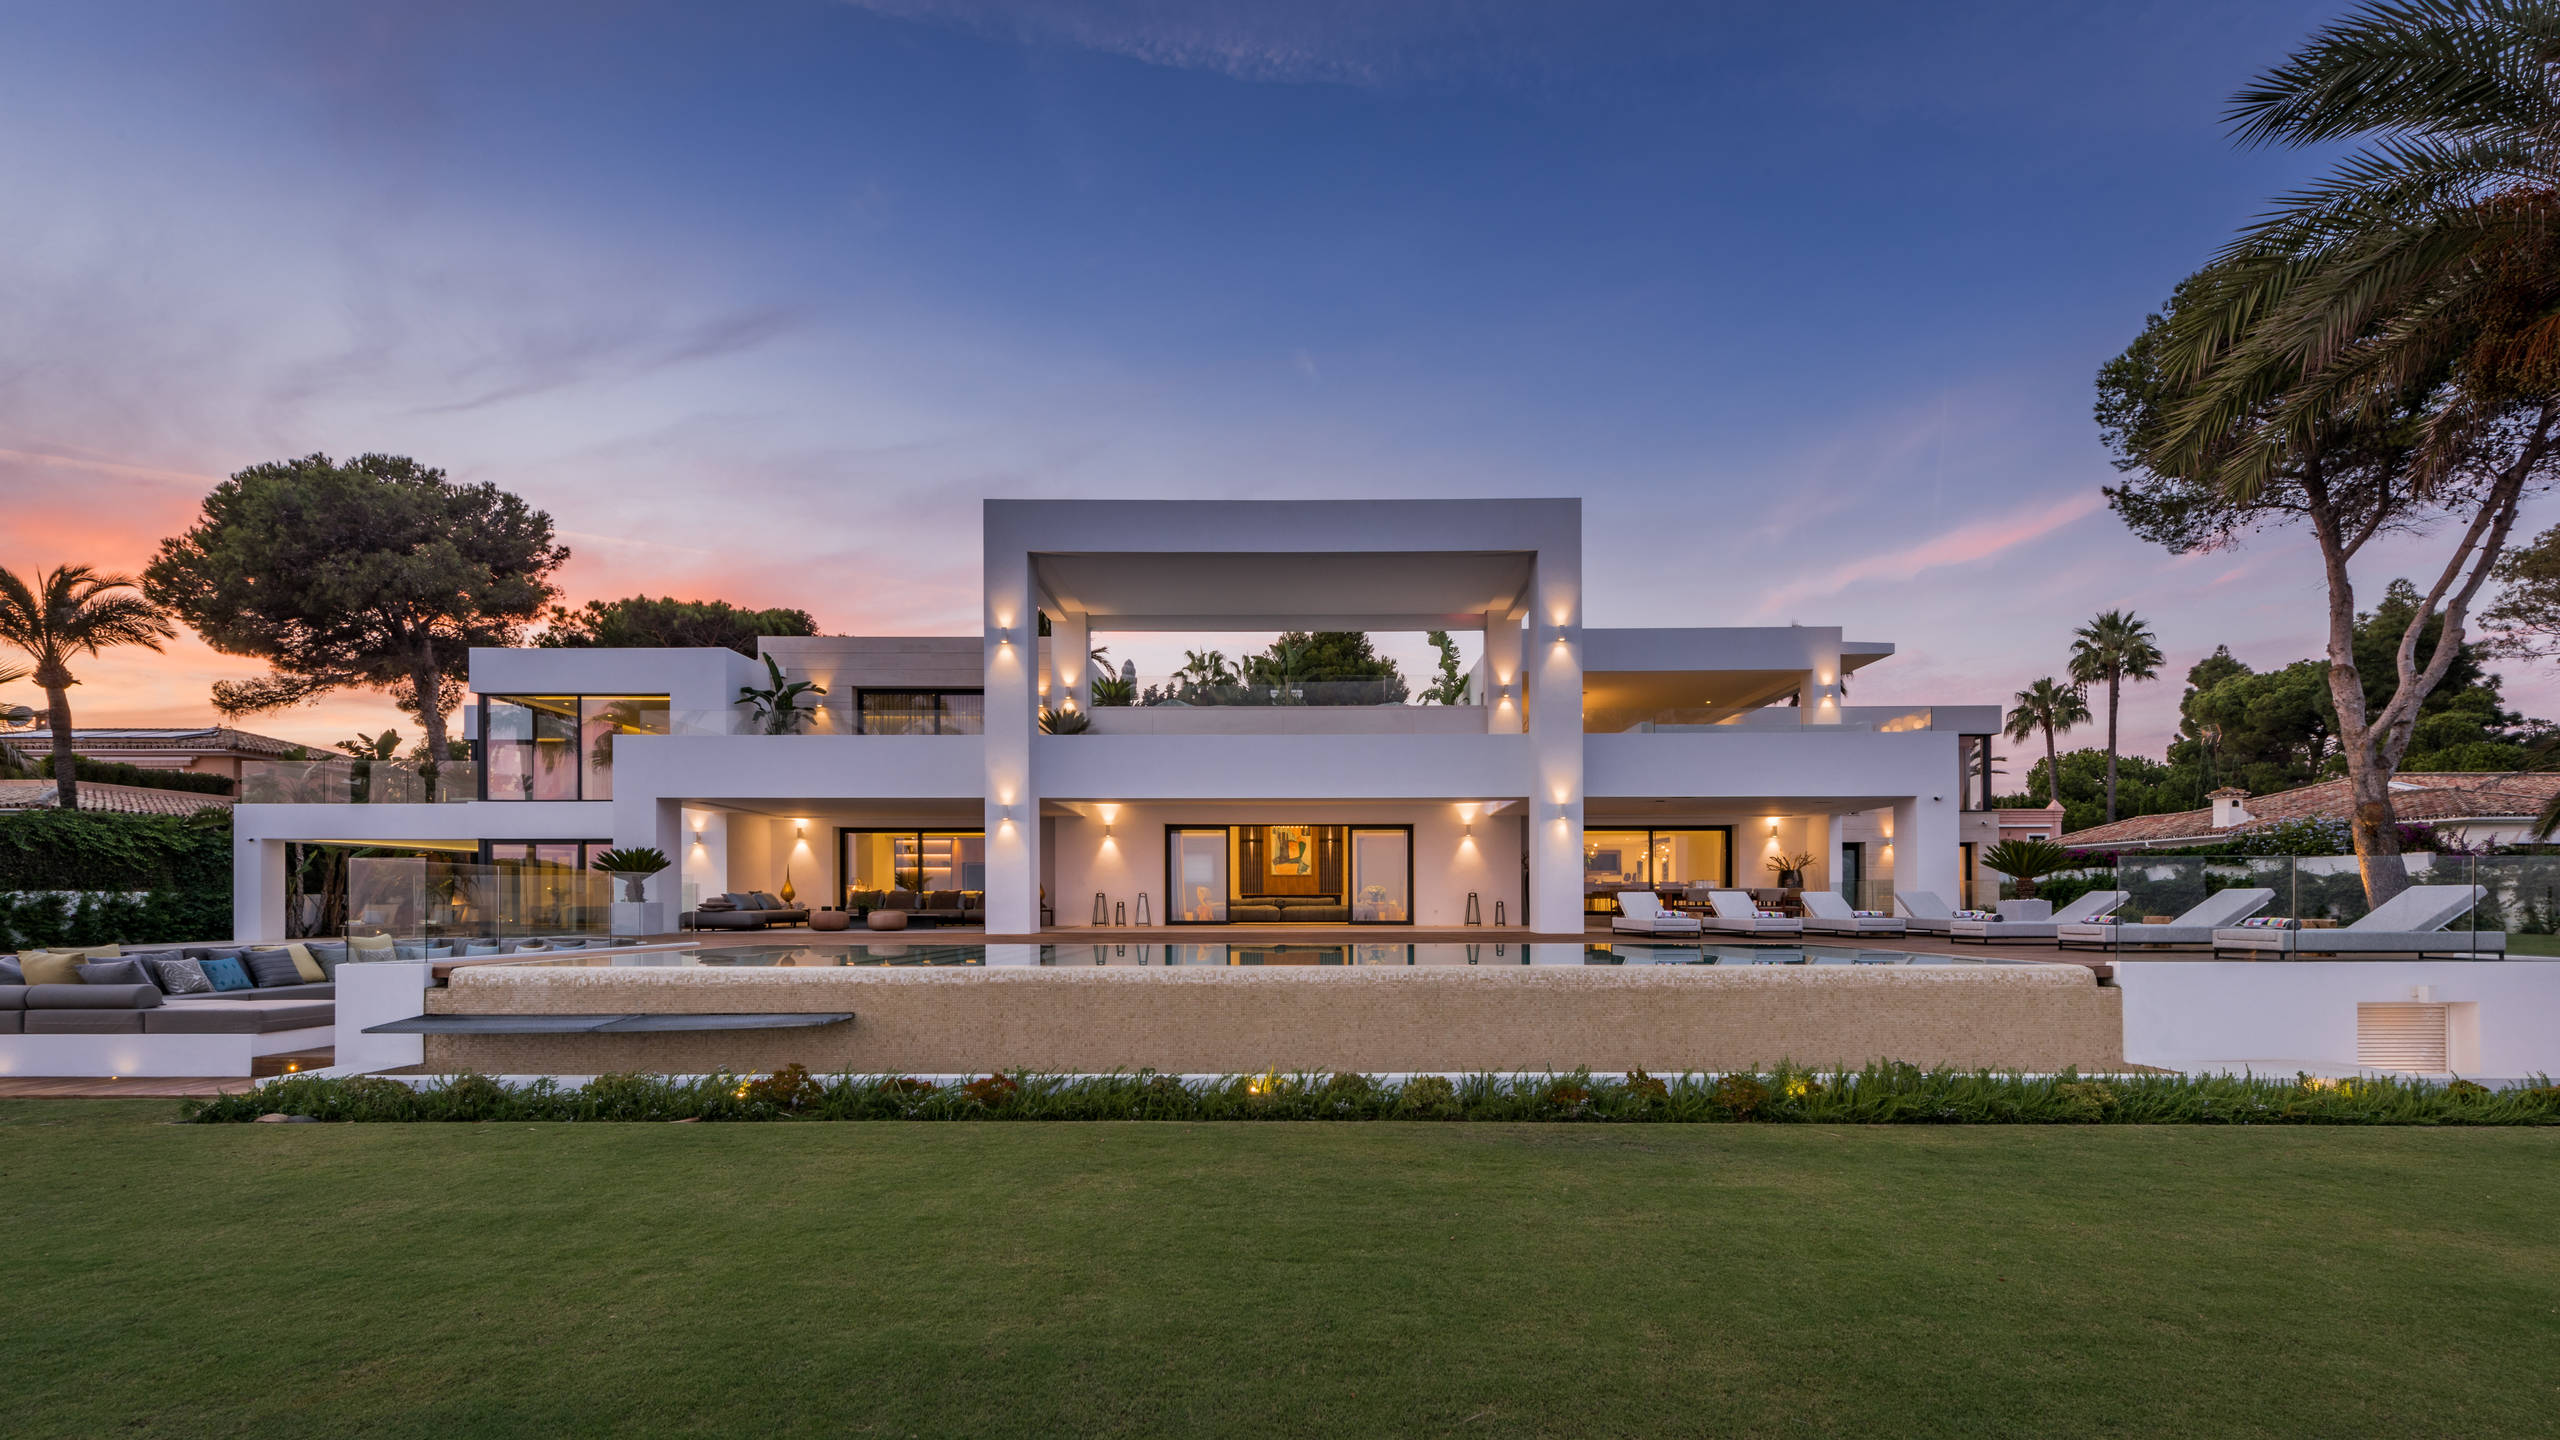 La Perla Blanca Spain - Contemporary - Exterior - Other - by Ambience Home  Design S.L | Houzz